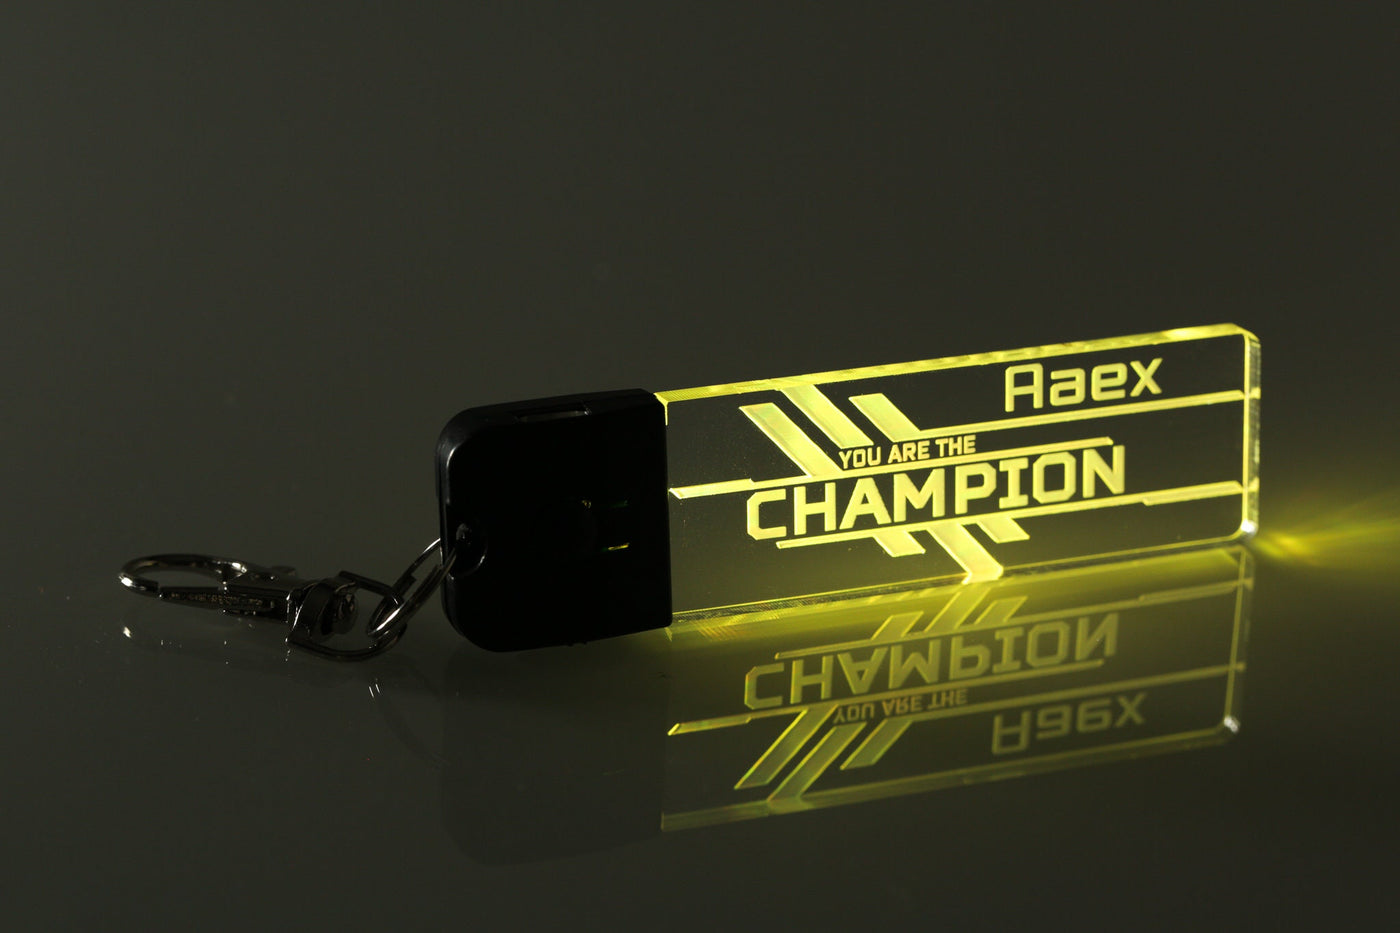 Personalized Apex Legends Key chain - Made in USA - Color Changing - Stocking Stuffer - Acrylic Keychain